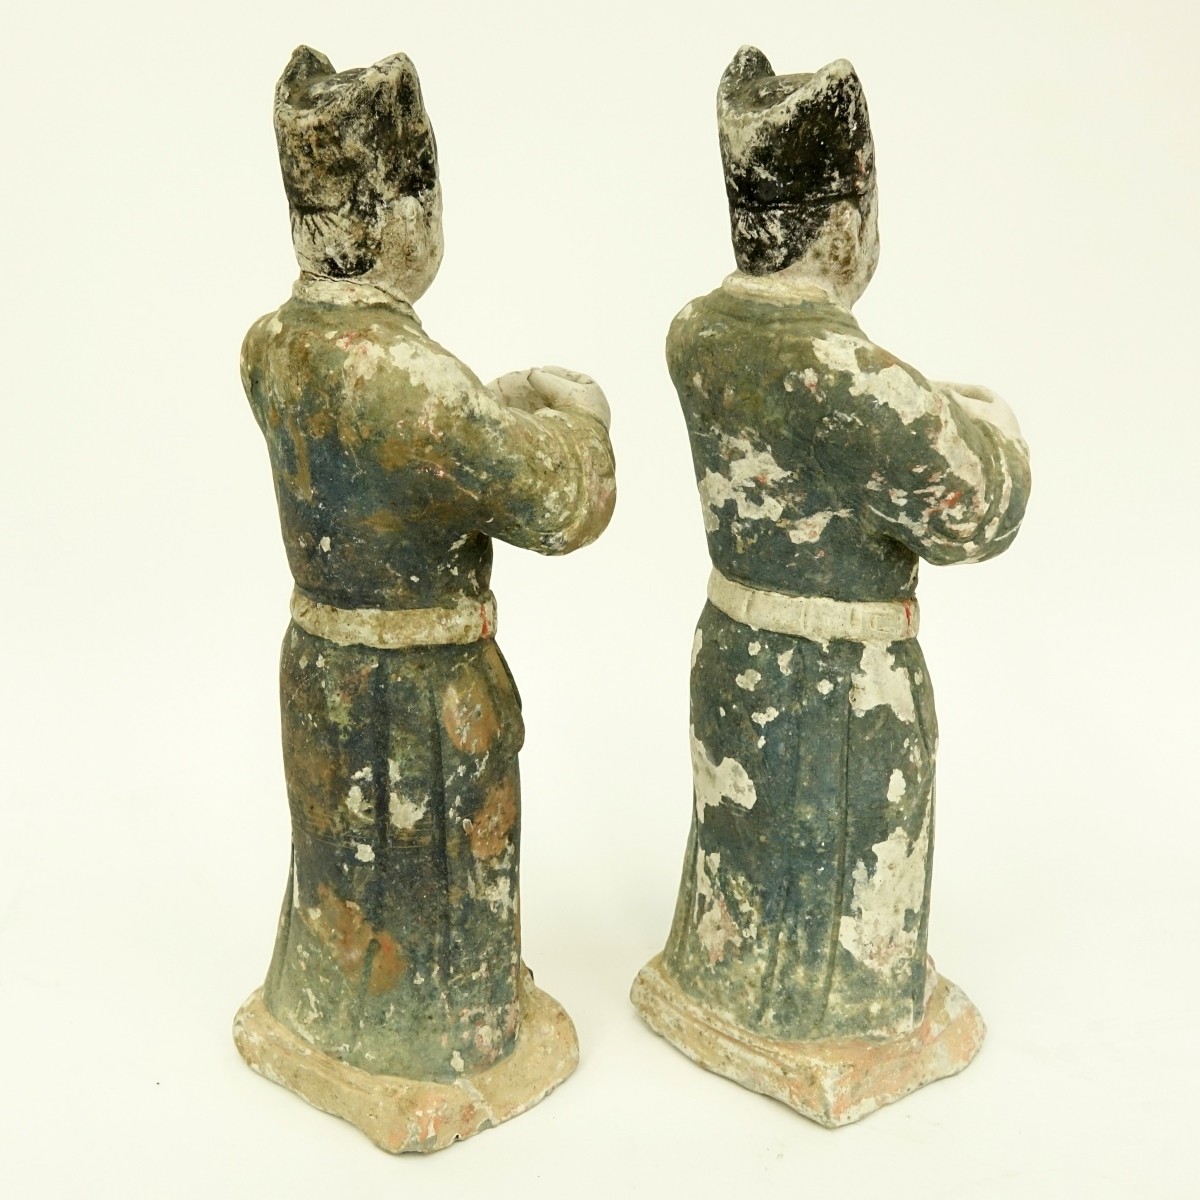 2 Chinese Ming (1368-1644 AD) Pottery Figures